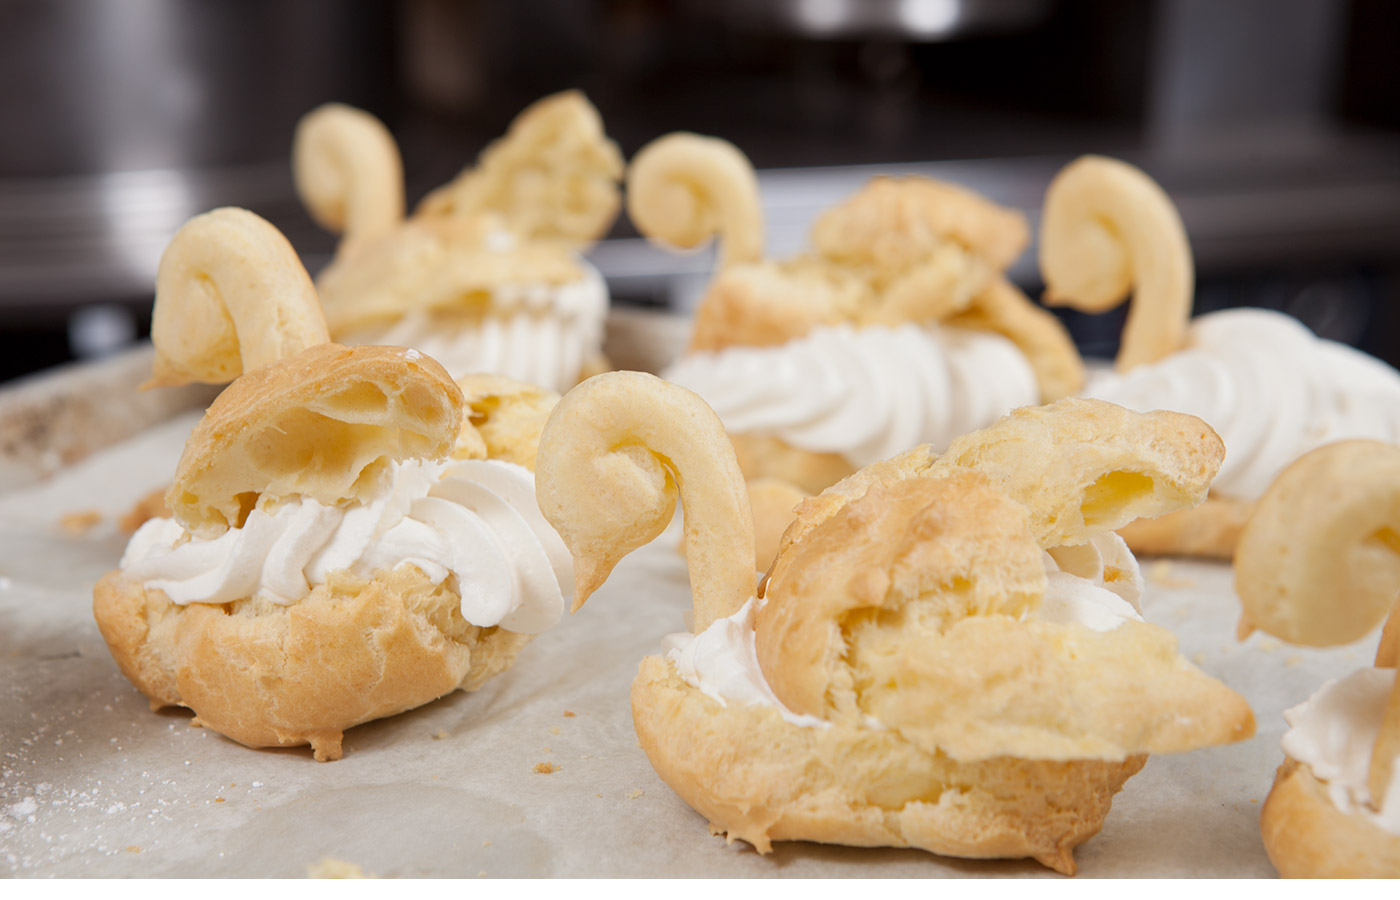 Swan shaped pastries with cream,